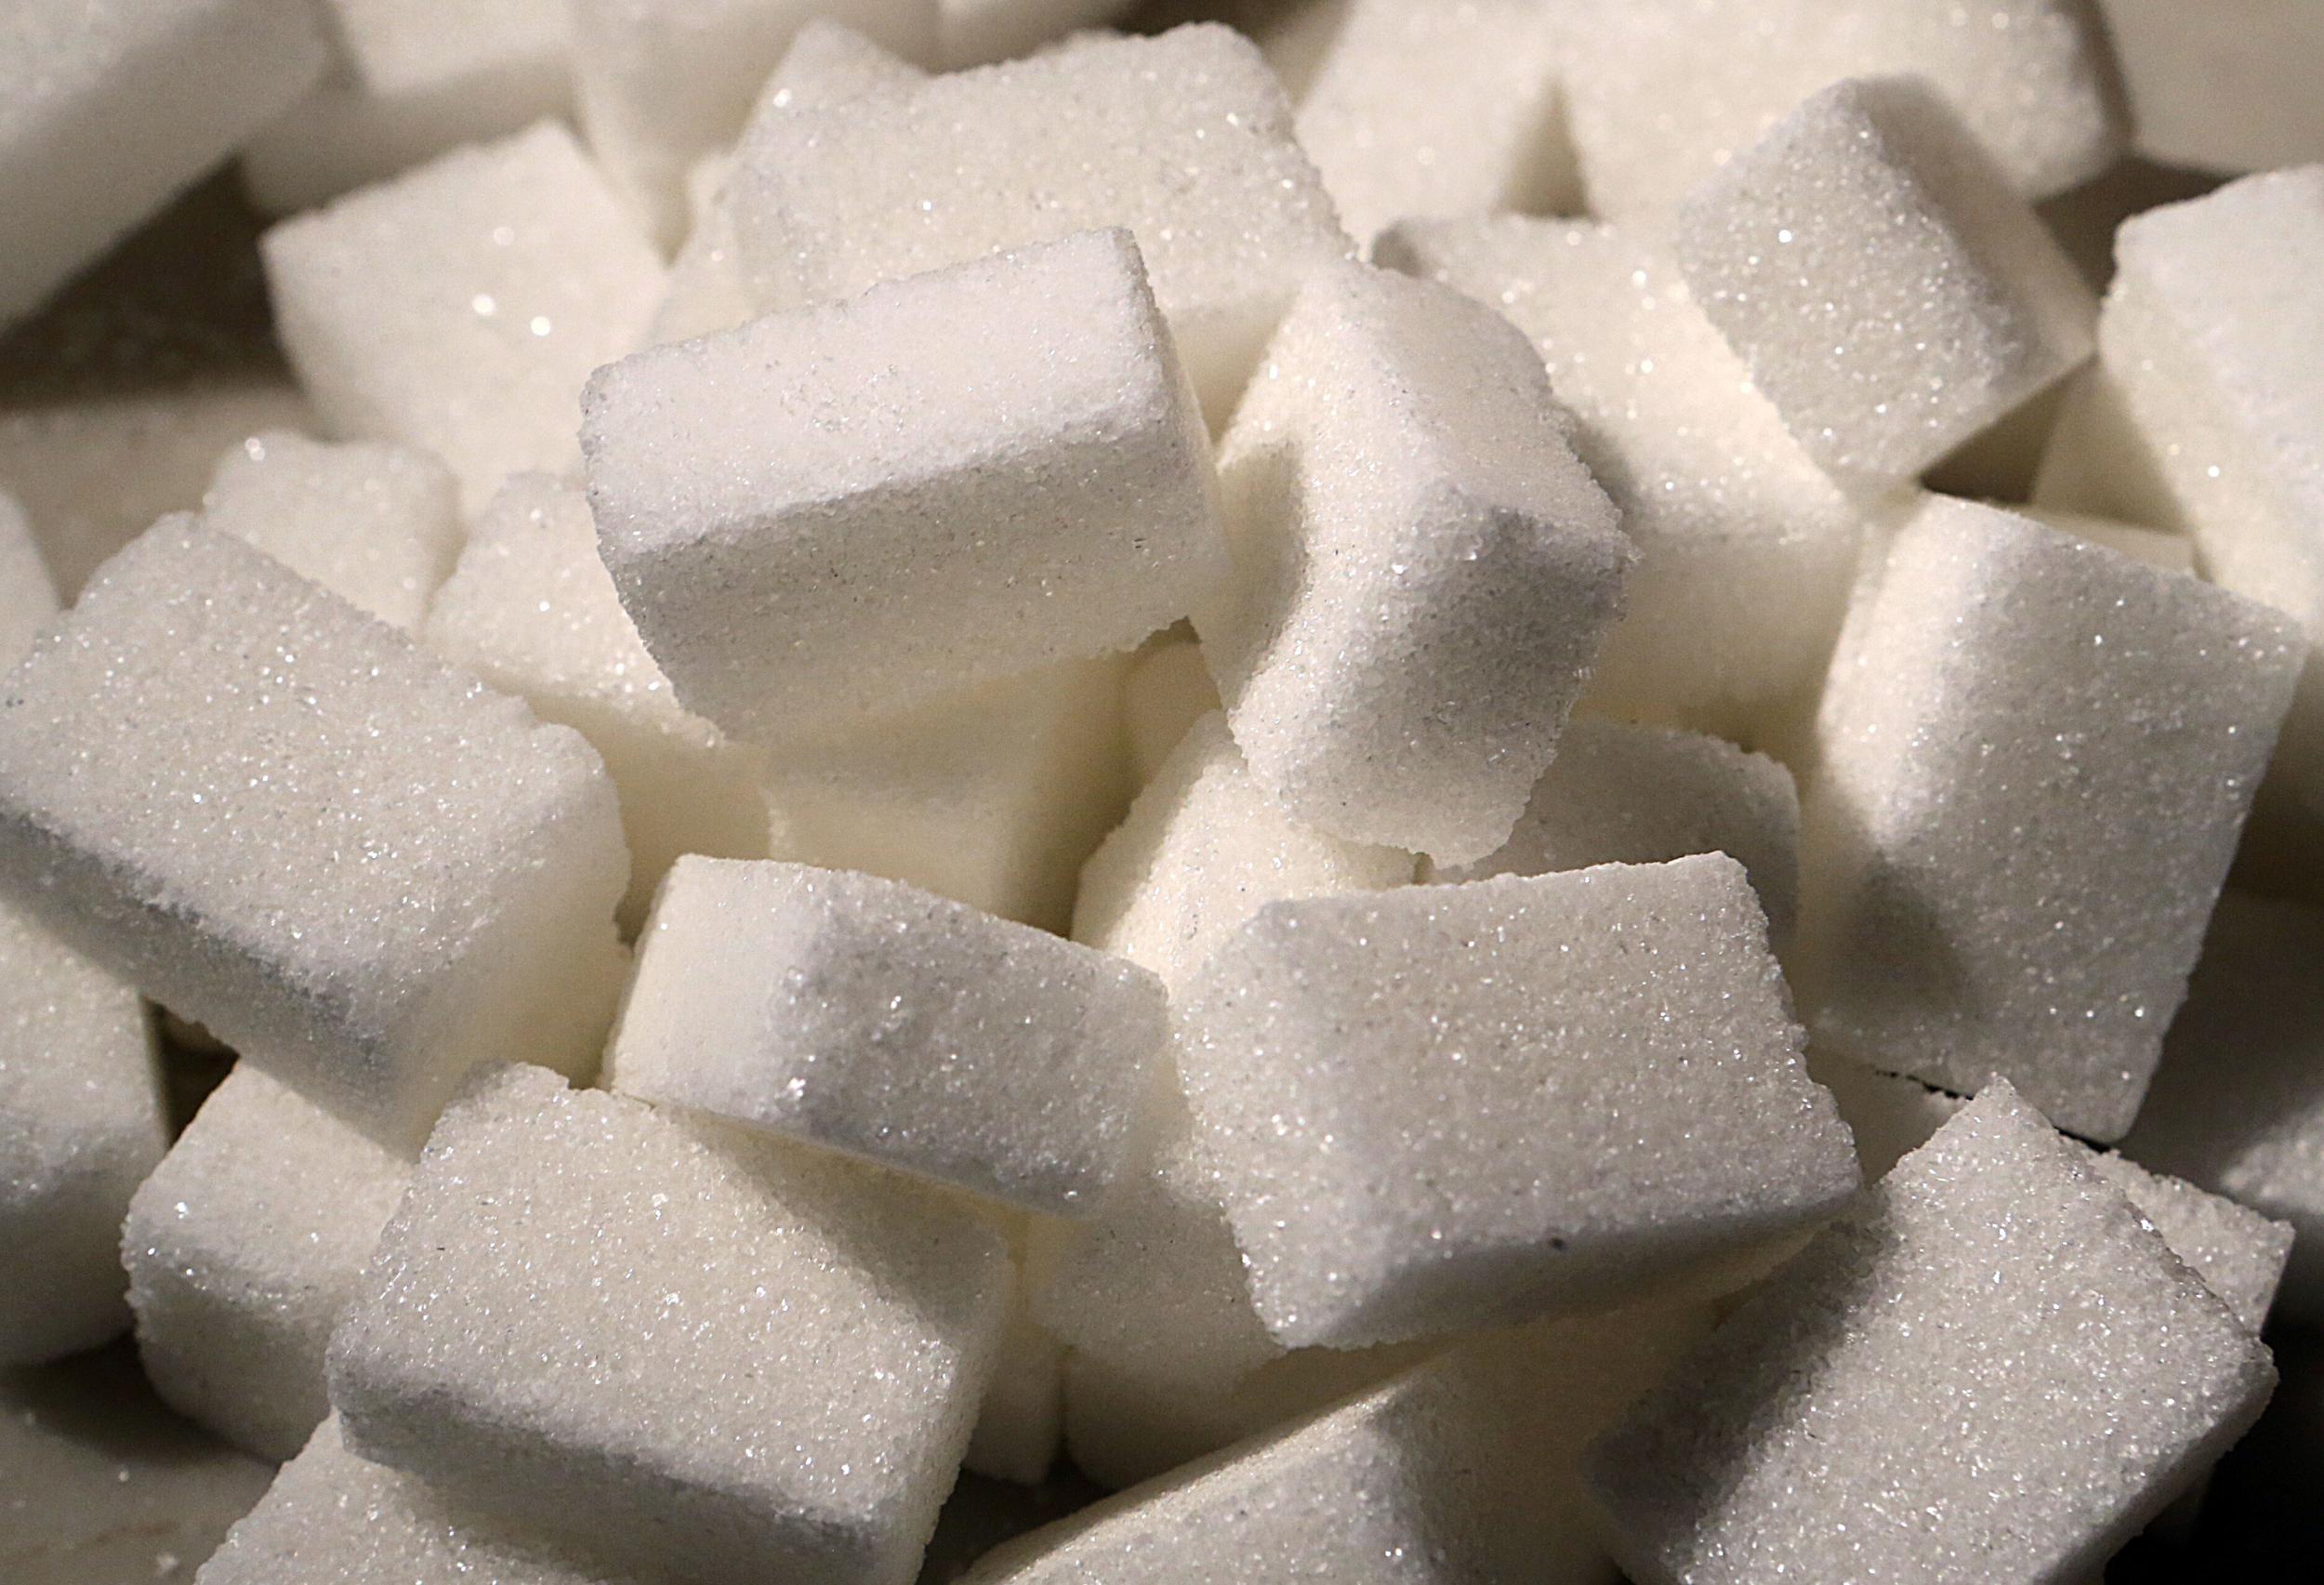 Doctors and health experts warn about the dangers of added sugar to the nation's health and the NHS.